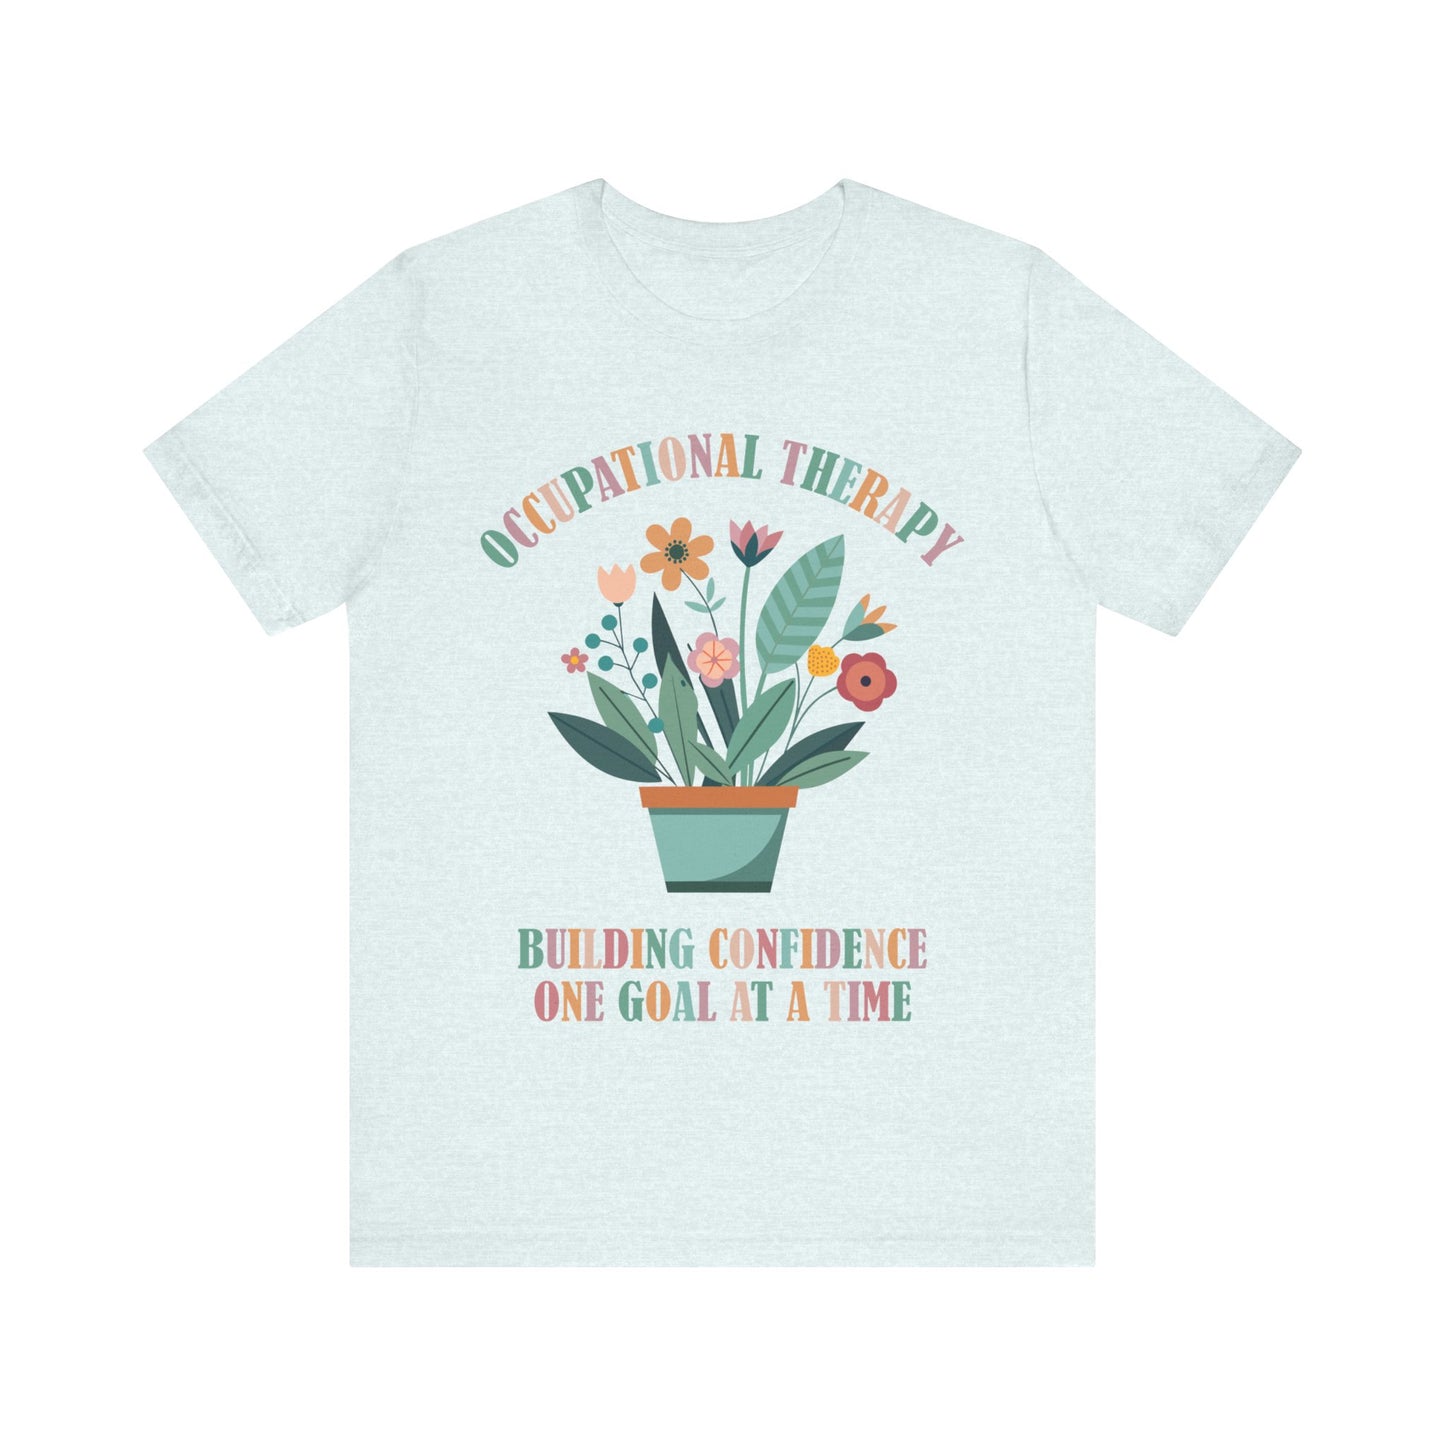 Occupational Therapy Building Confidence One Goal At A Time Shirt